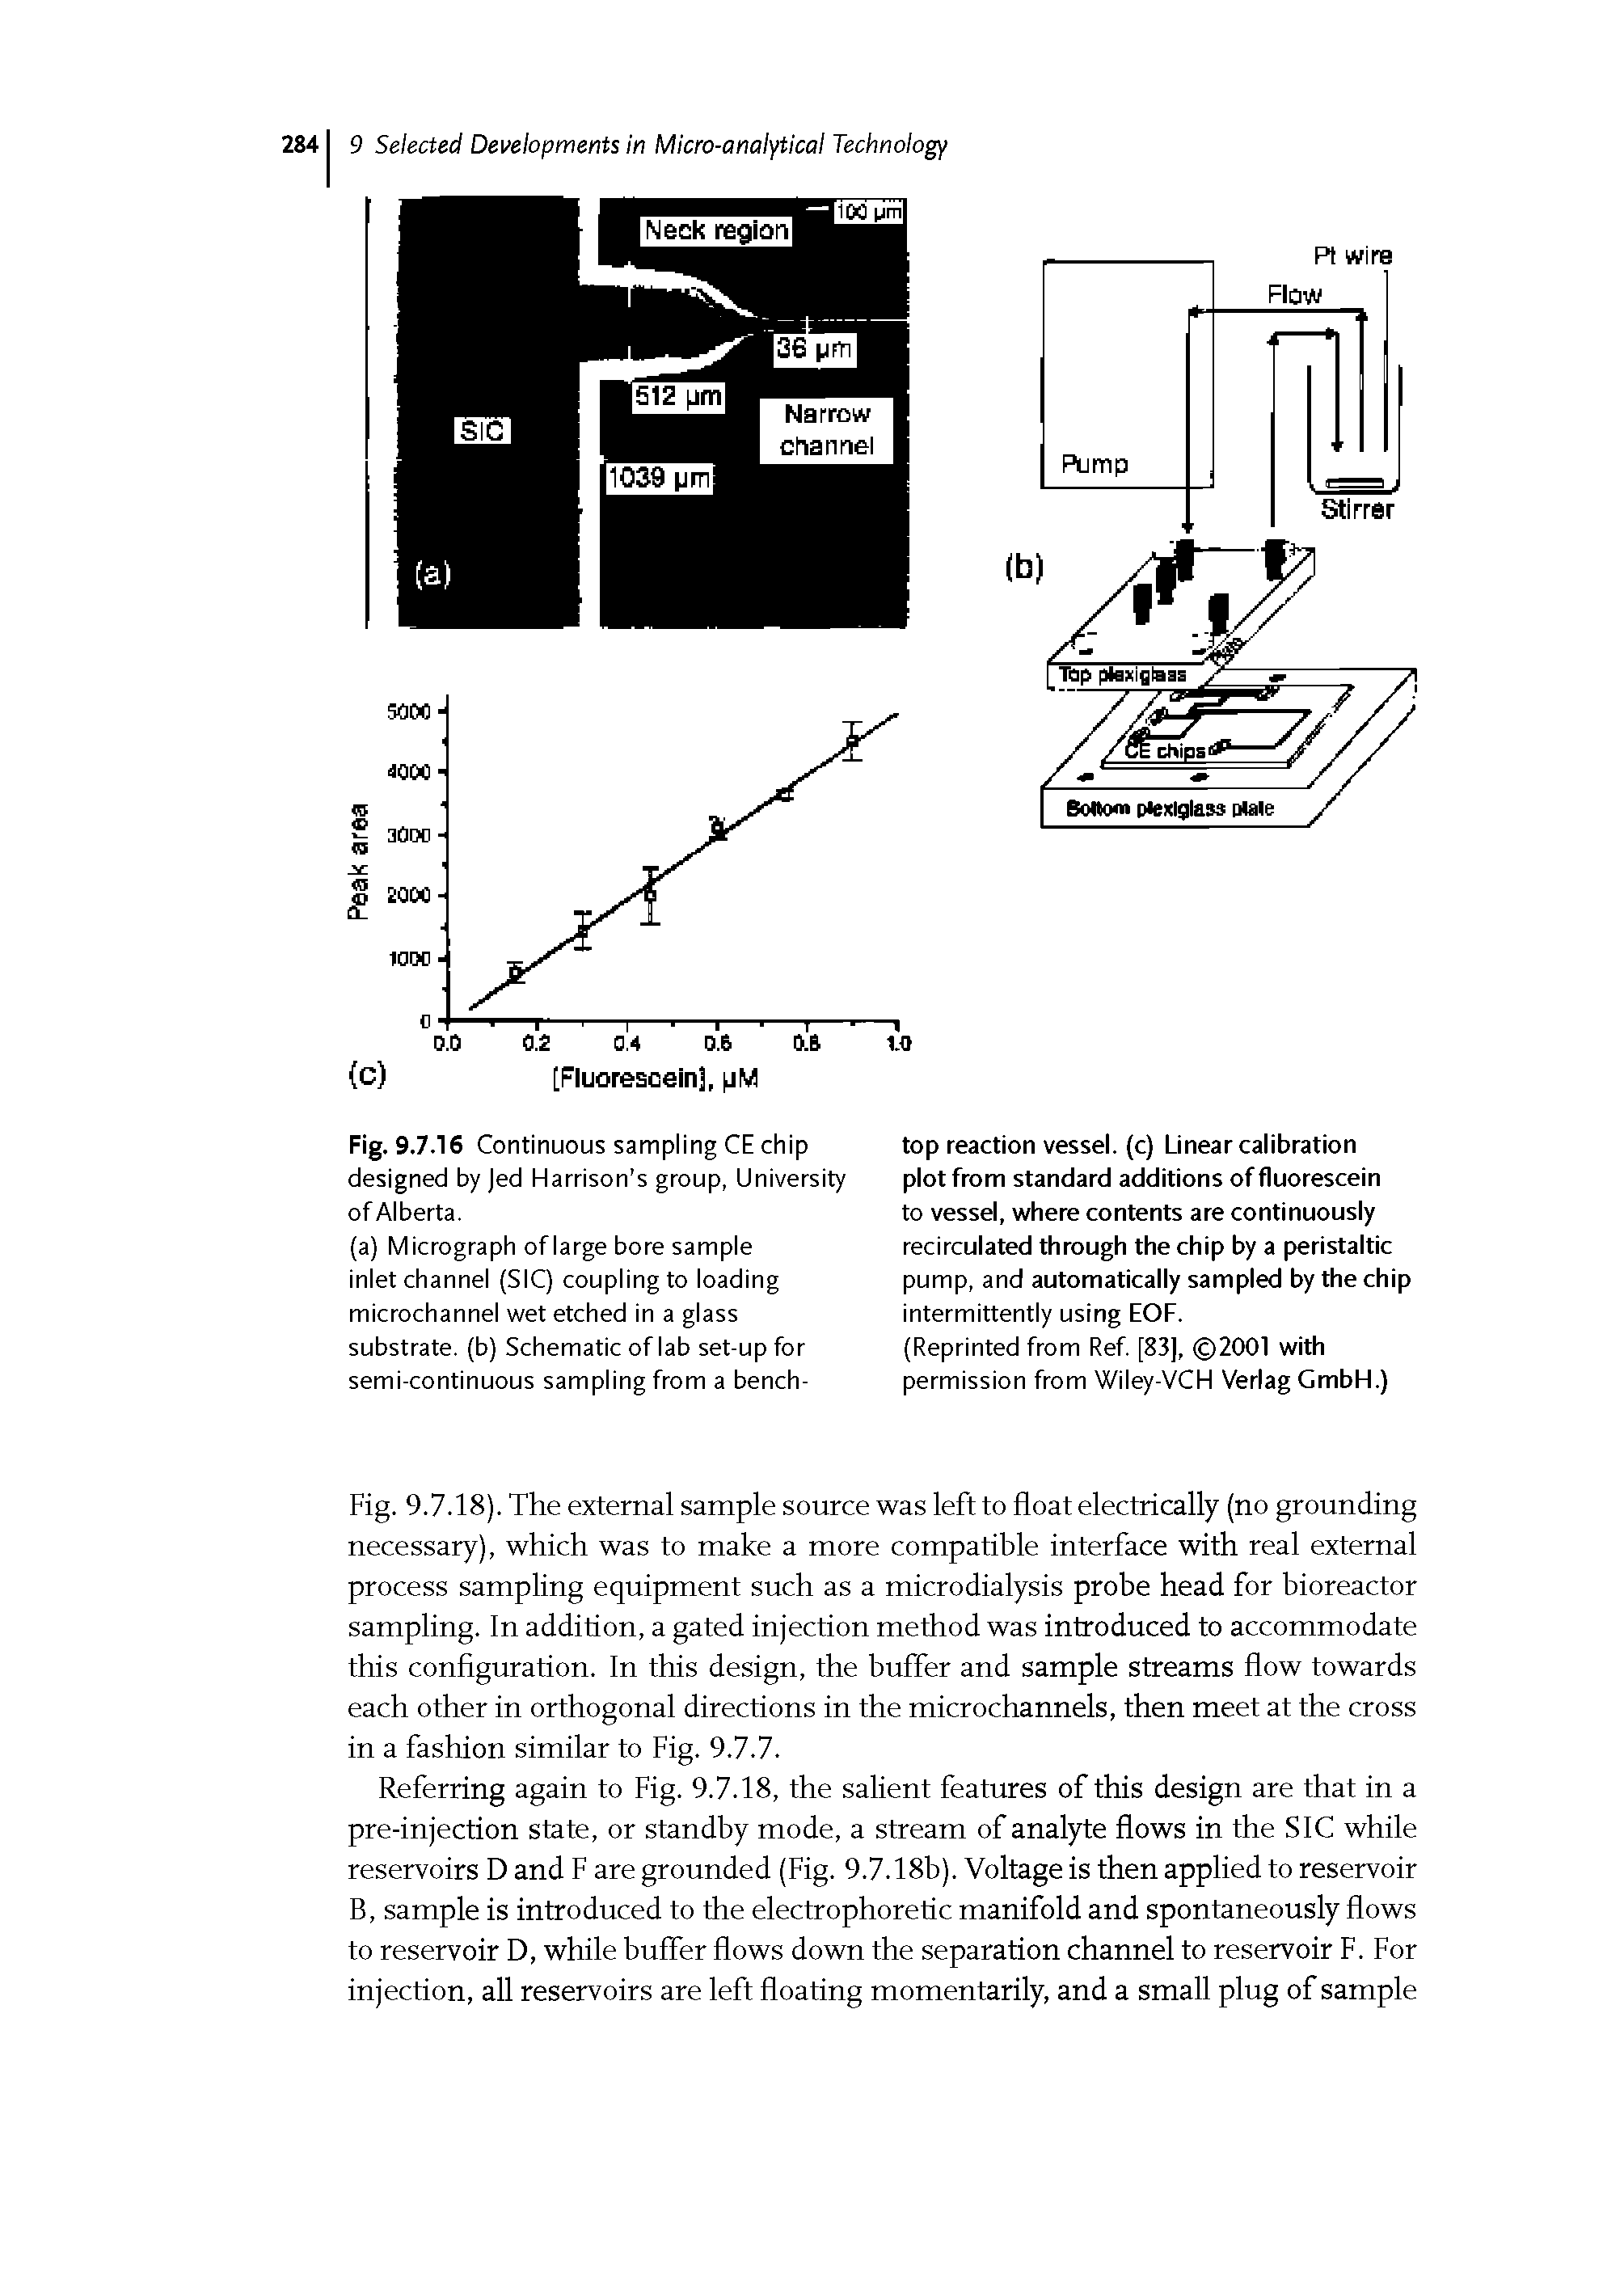 Fig. 9.7.18). The external sample source was left to float electrically (no grounding necessary), which was to make a more compatible interface with real external process sampling equipment such as a microdialysis probe head for bioreactor sampling. In addition, a gated injection method was introduced to accommodate this conhguration. In this design, the buffer and sample streams flow towards each other in orthogonal directions in the microchannels, then meet at the cross in a fashion similar to Fig. 9.7.7.